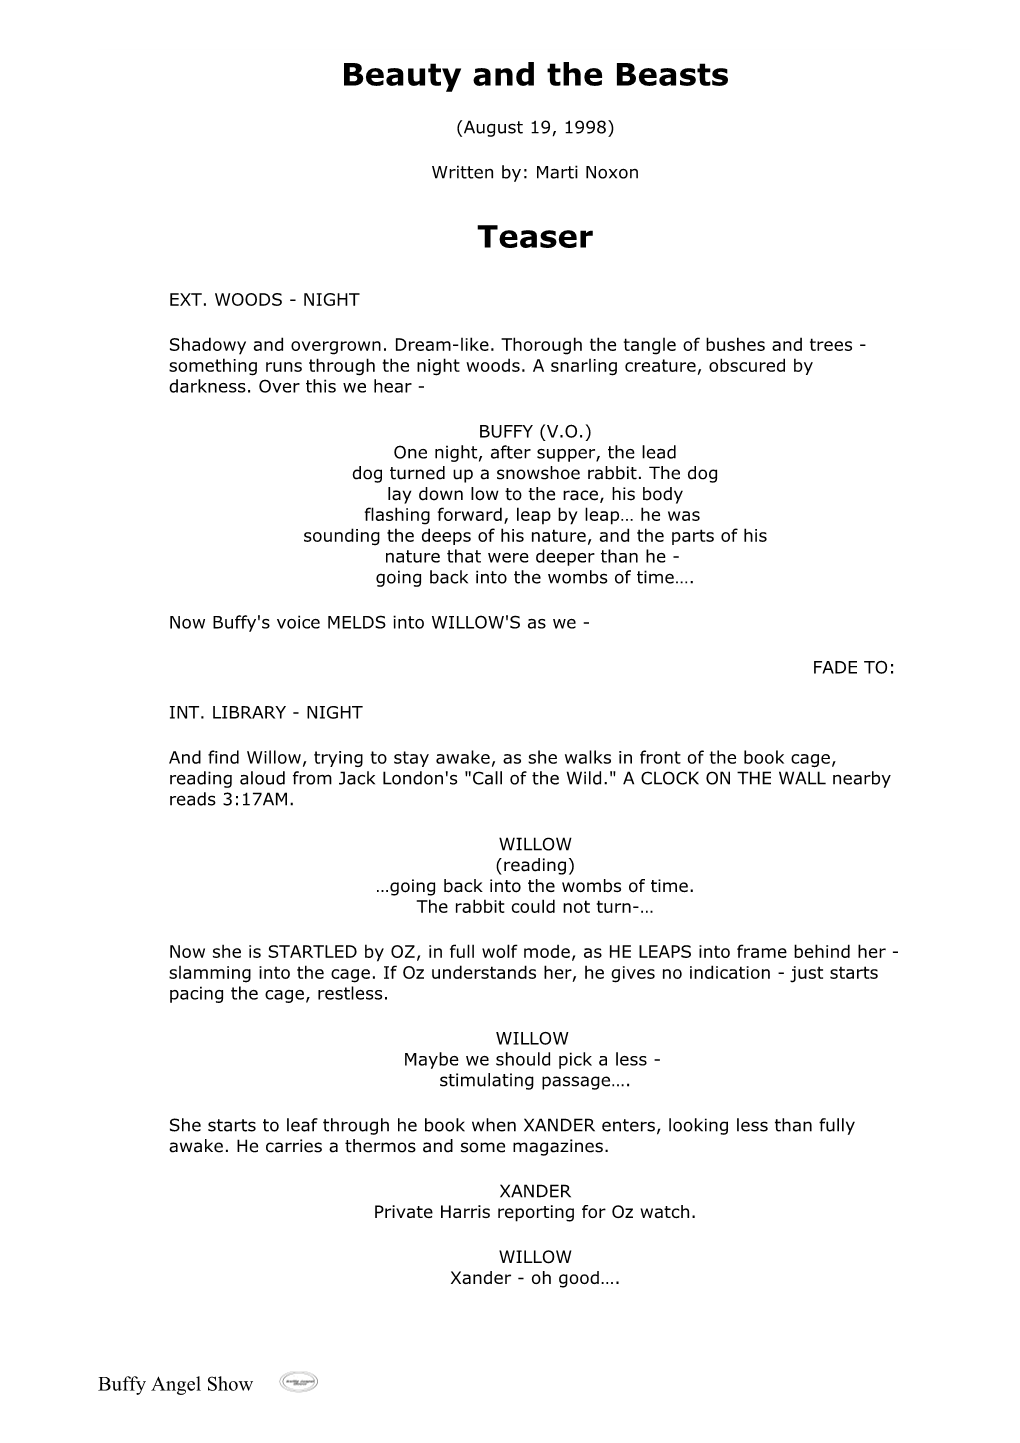 Beauty and the Beasts Script